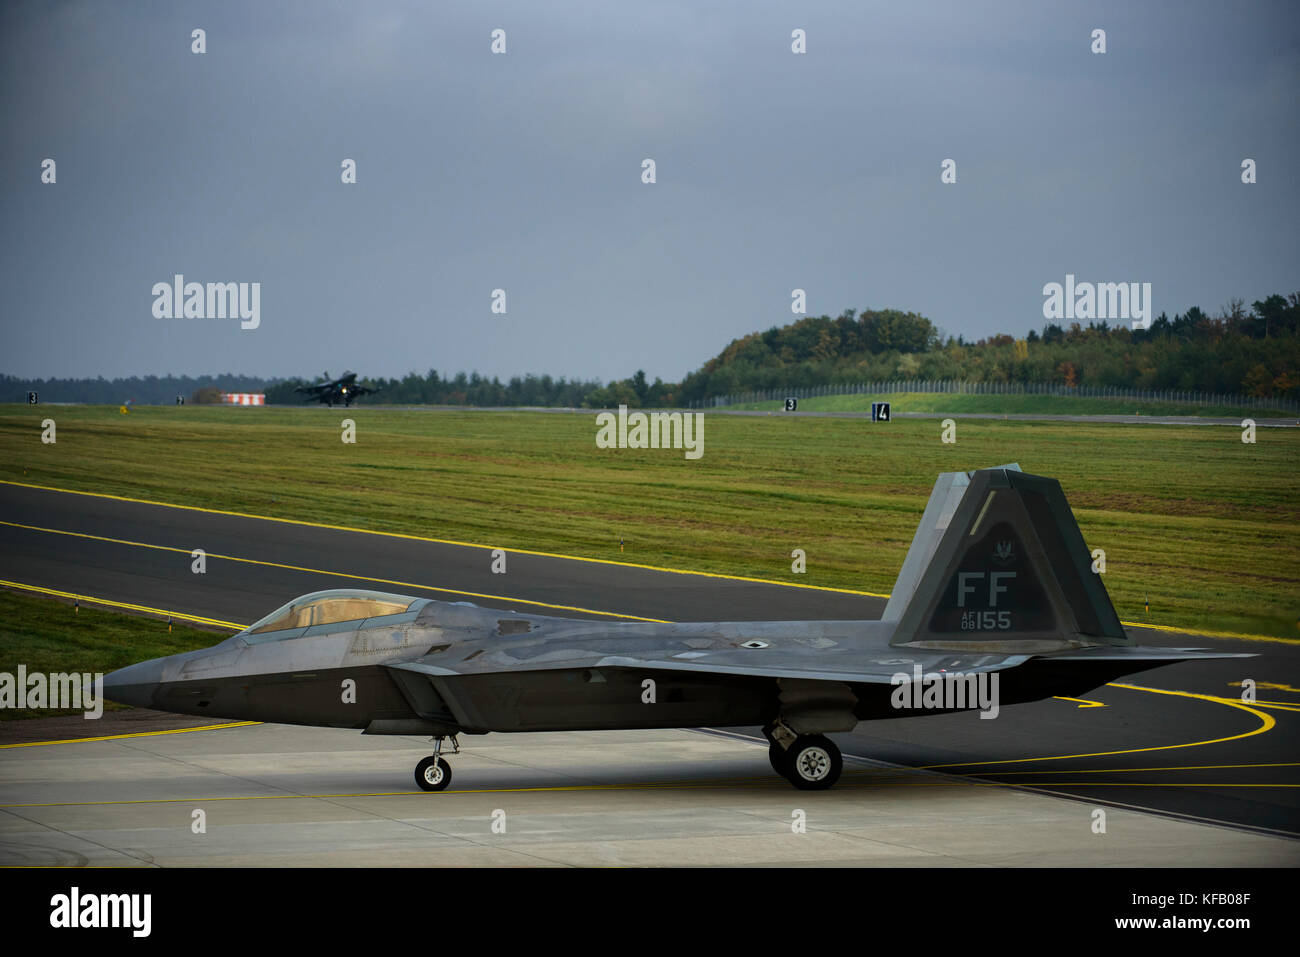 A U.S. Air Force F-22 Raptor stealth tactical fighter aircraft taxis on the runway at the Spangdahlem Air Base October 13, 2017 near Spangdahlem, Germany.   (photo by Jonathan Snyder via Planetpix) Stock Photo